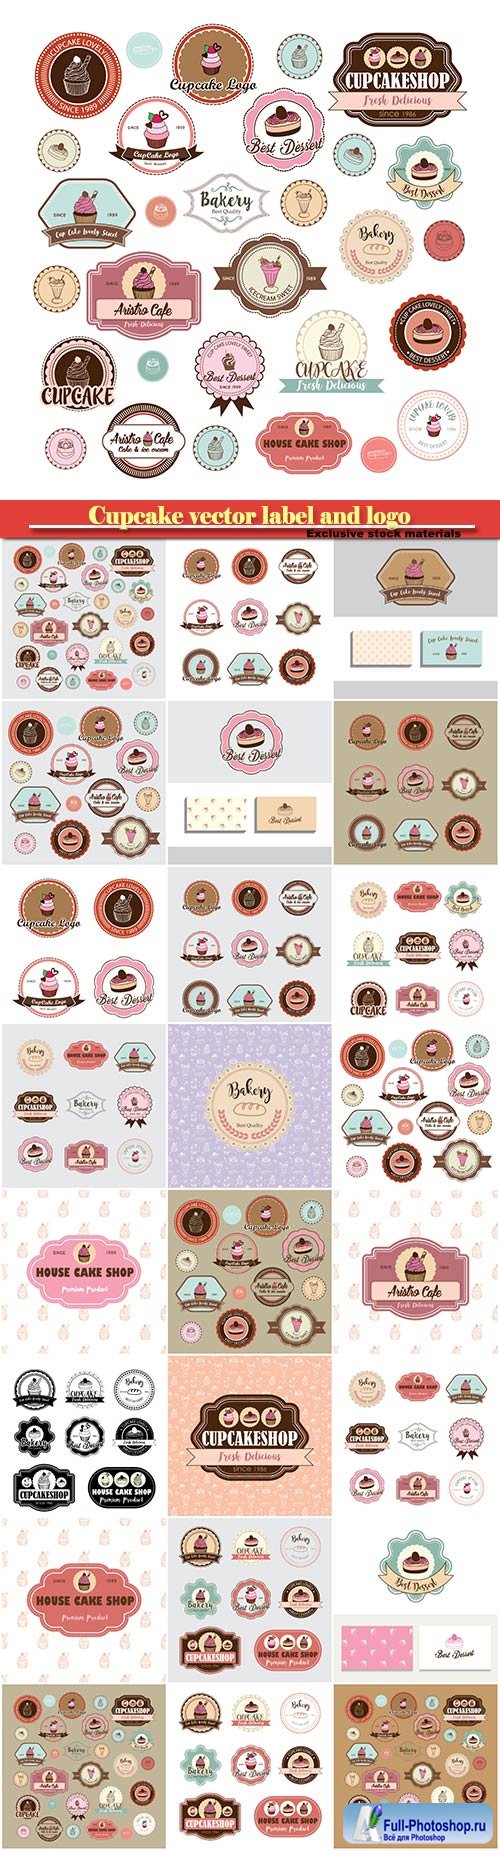 Cupcake vector label and logo illustration